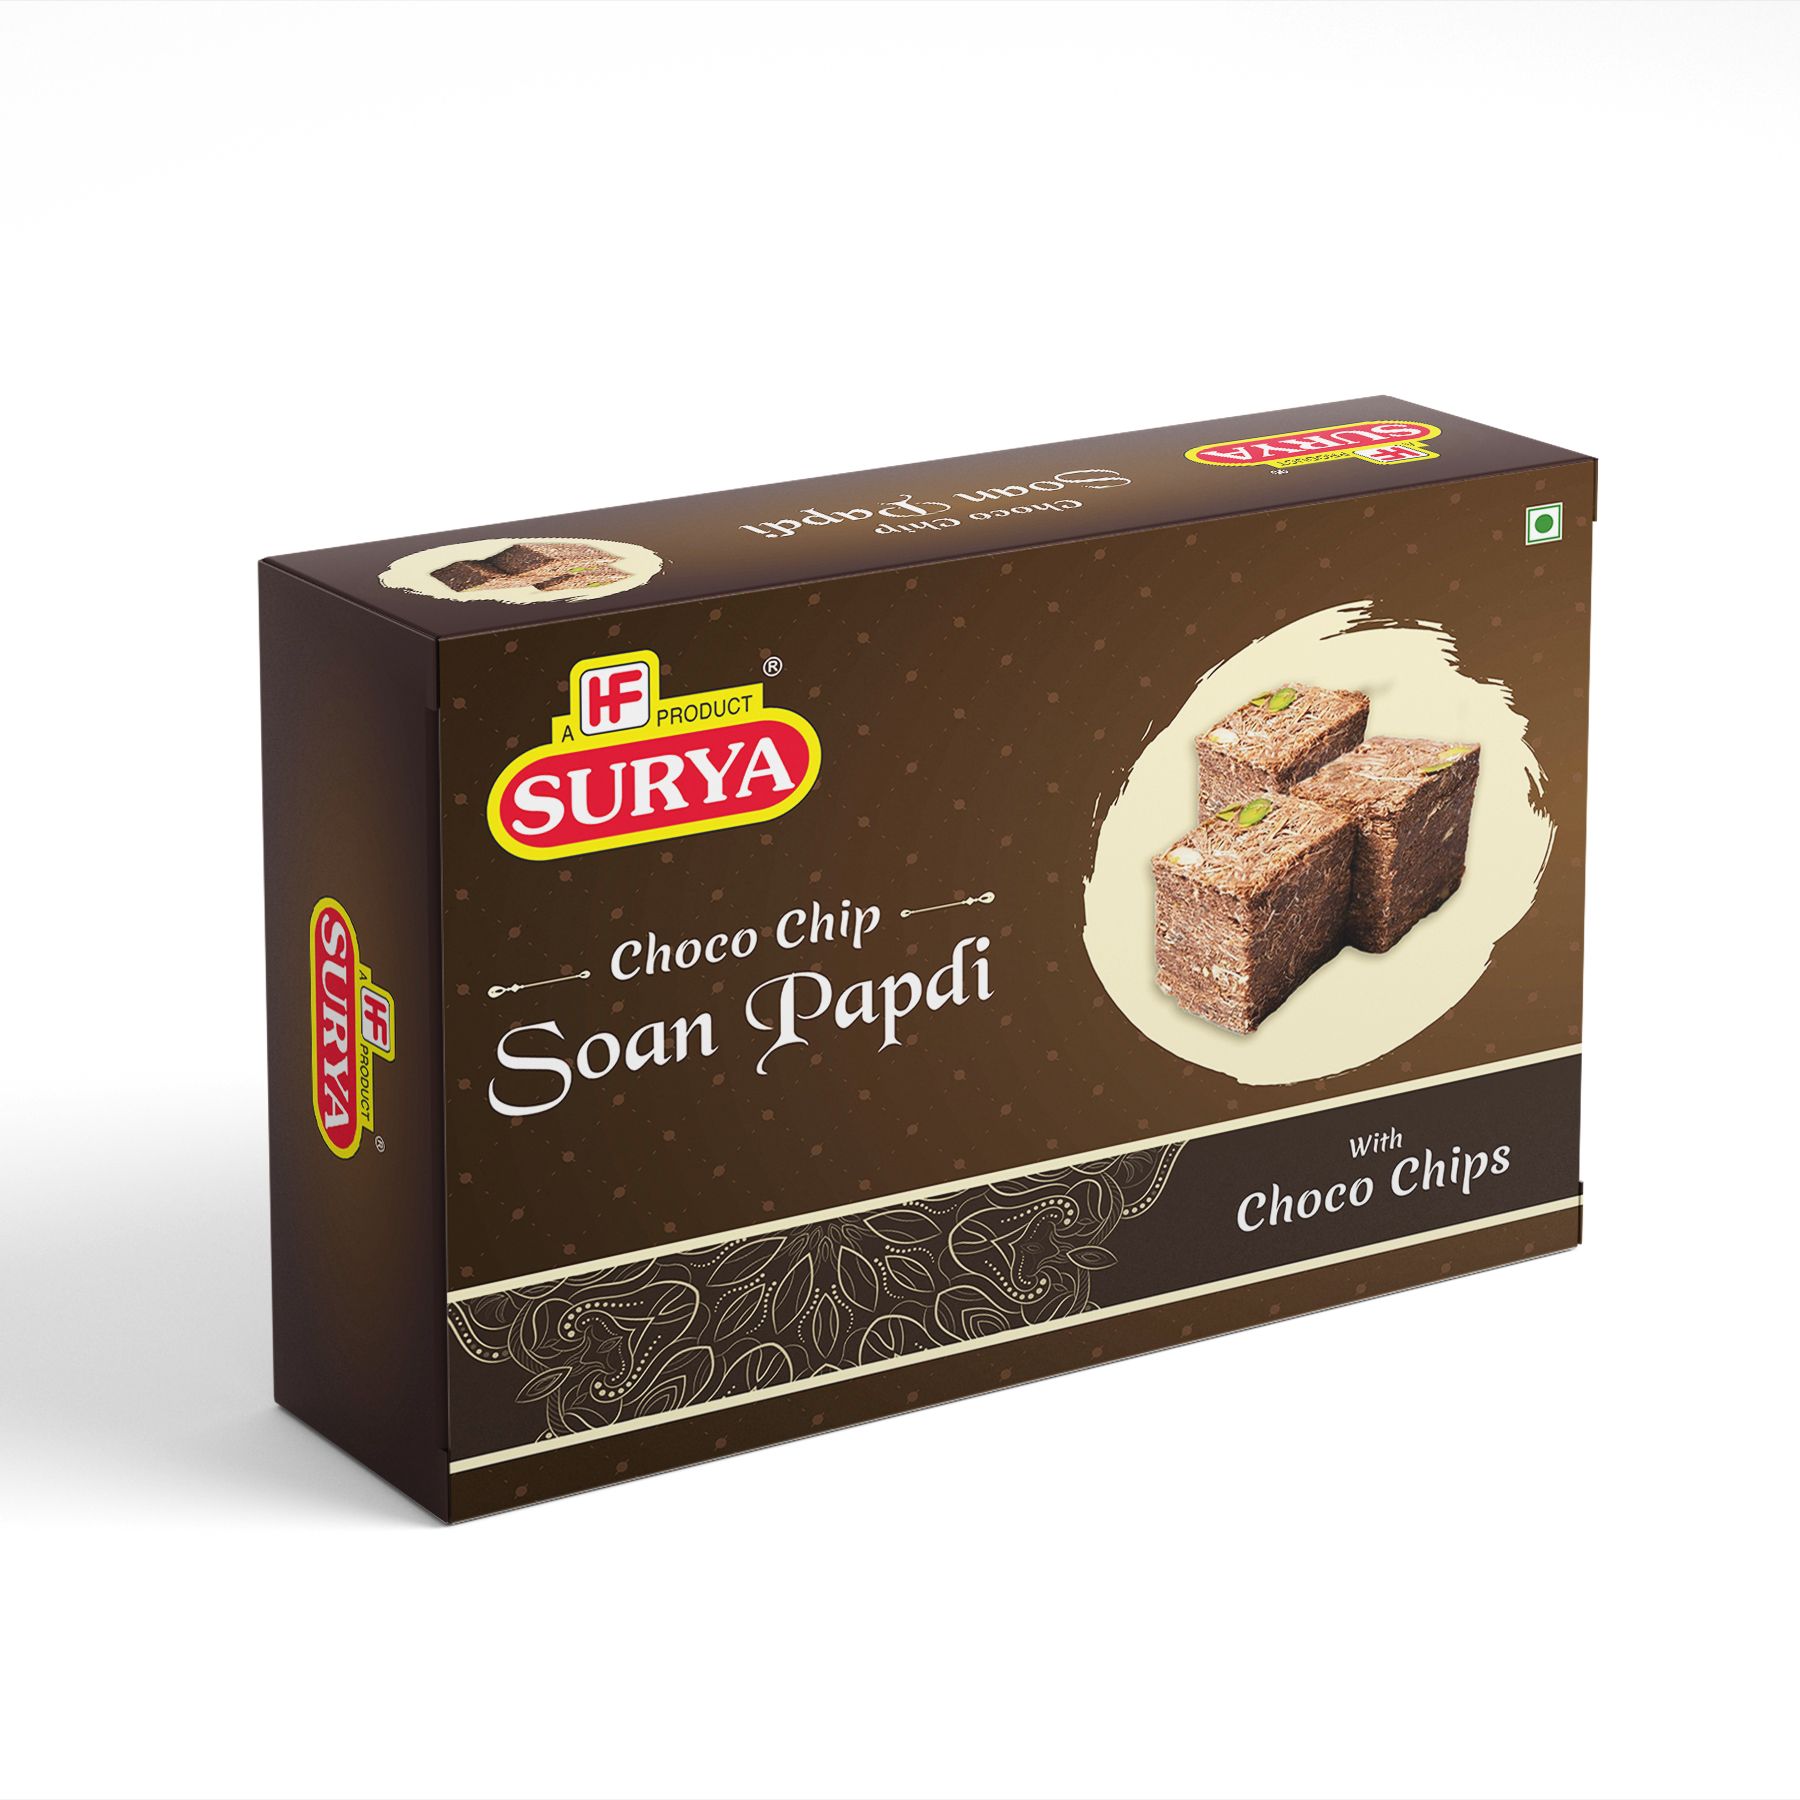 Mahi Soan 'N' Cake Eliche Flavored Delicious And Yummy Soan Papdi, 200Gm  Grade: Food Grade at Best Price in Nagpur | Mahe Food Products